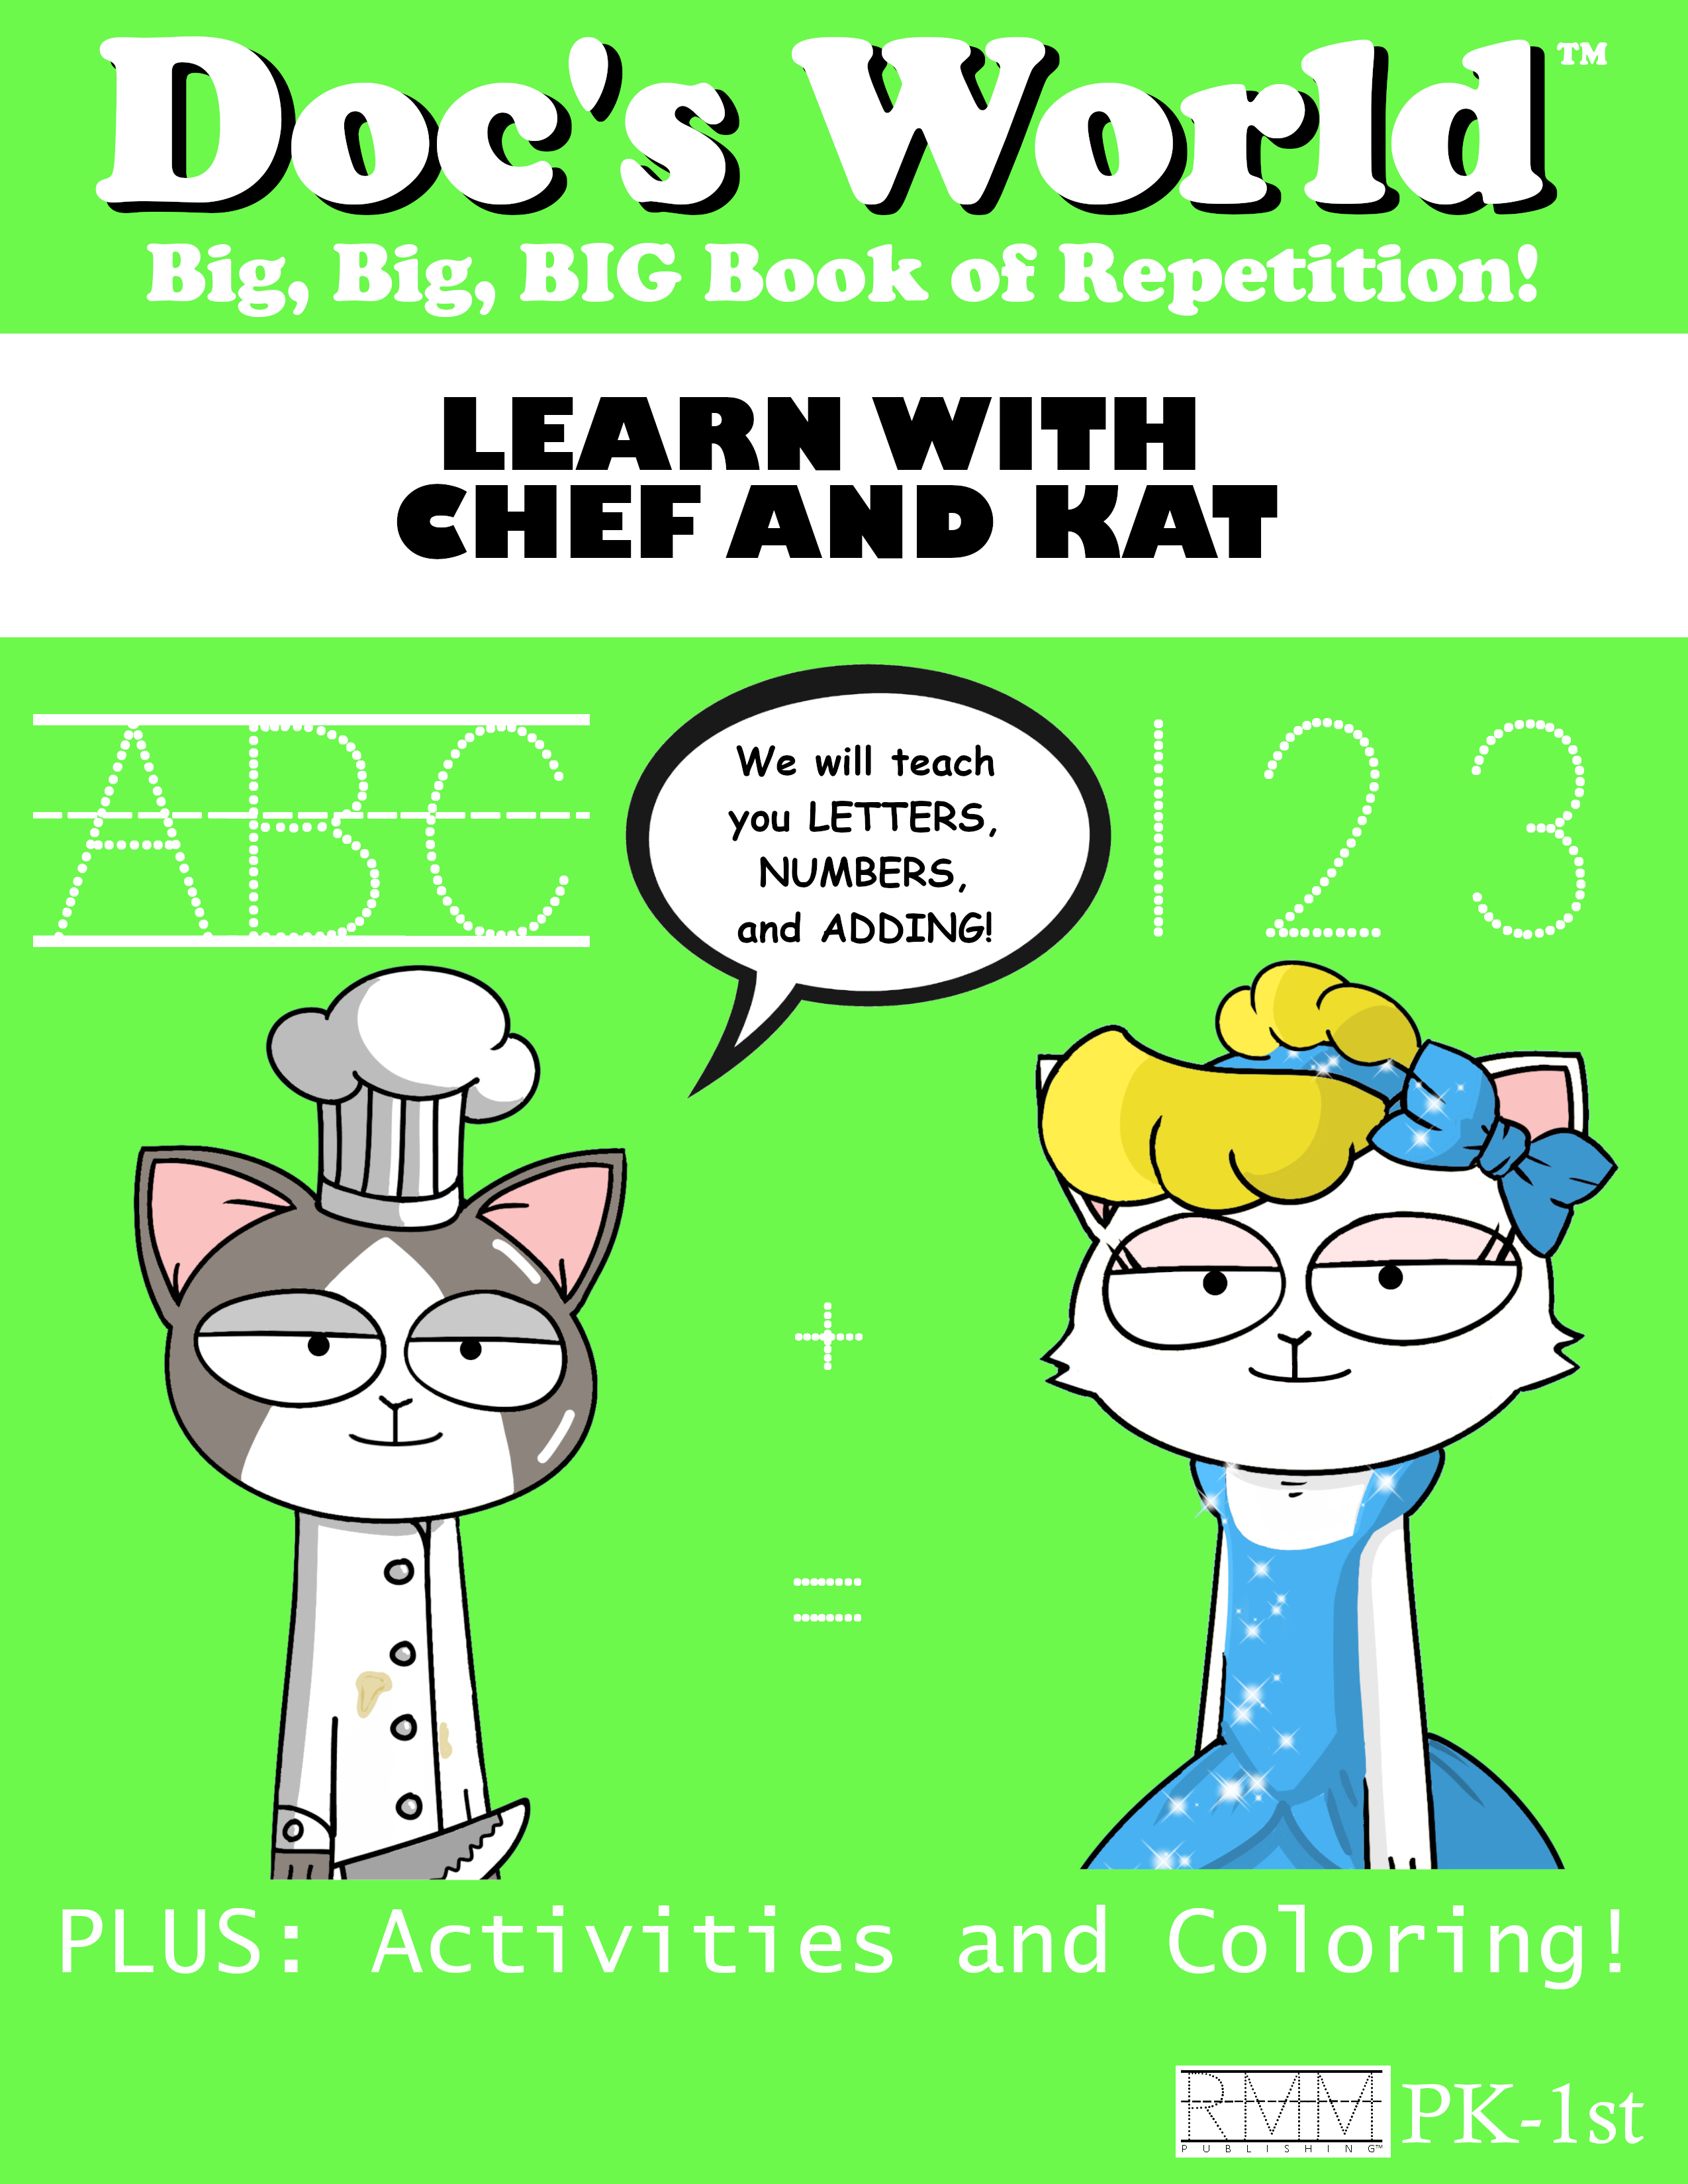 Chef and Kat Cover 1